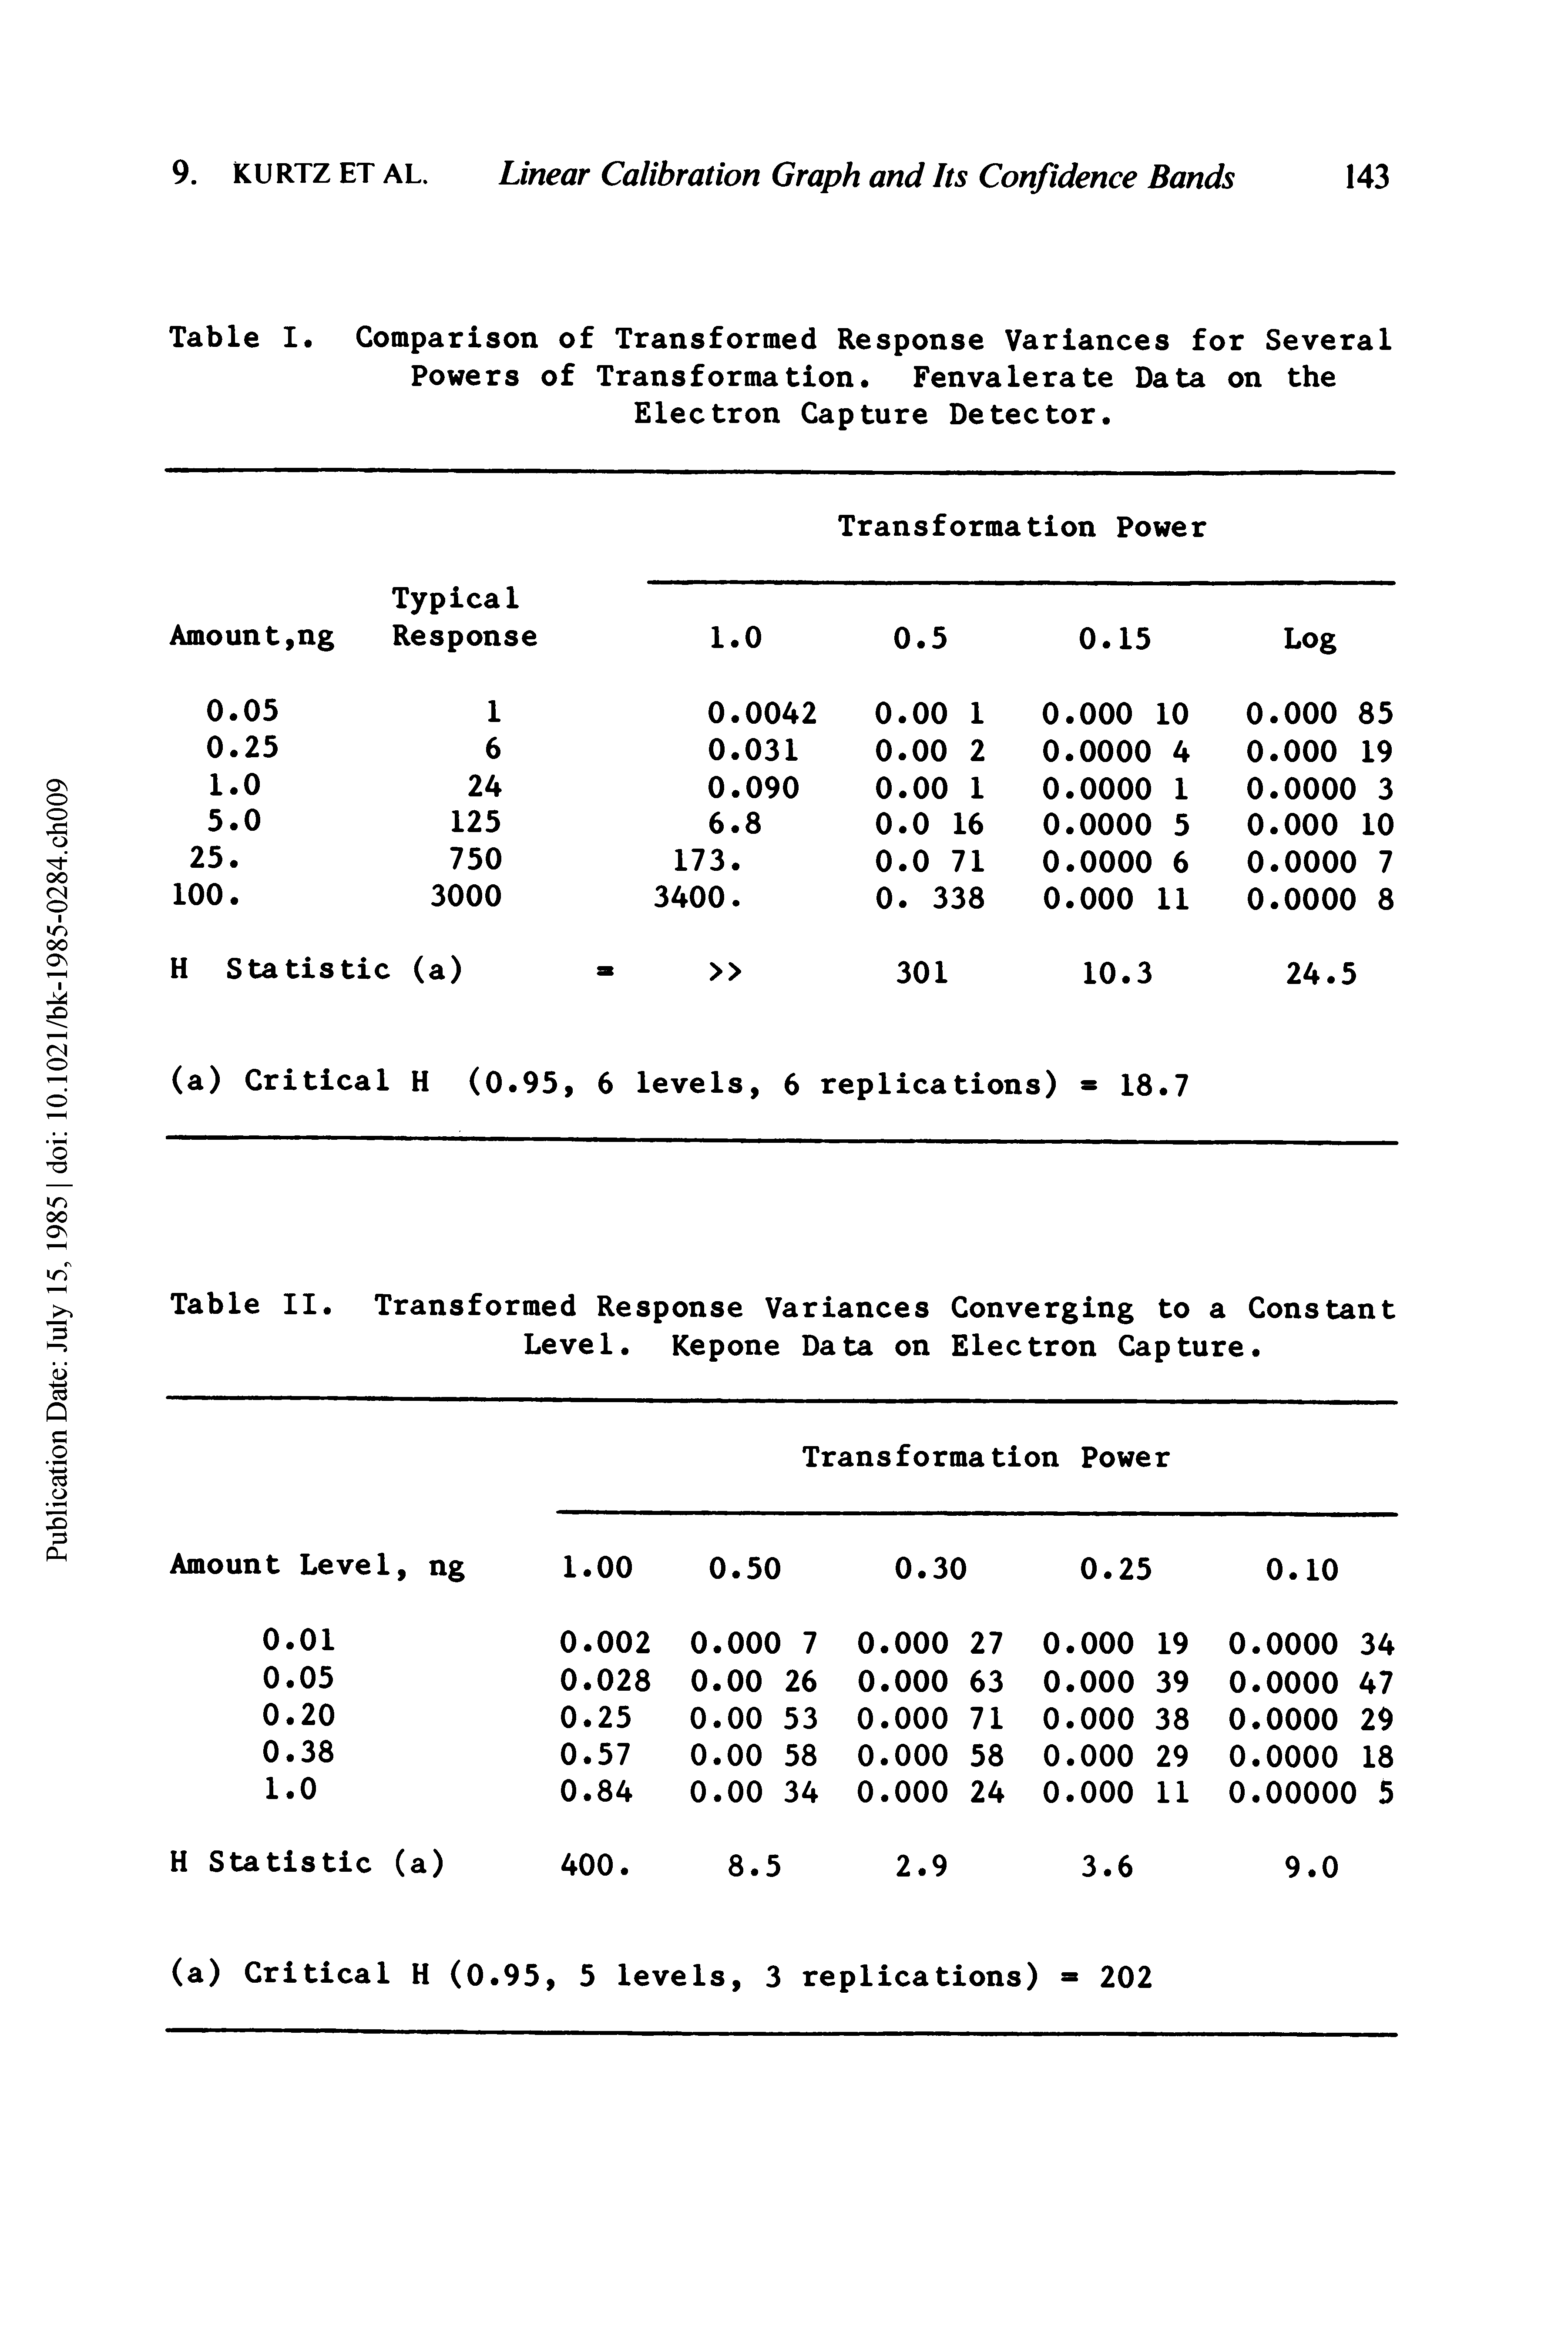 Table I. Comparison of Transformed Response Variances for Several Powers of Transformation. Fenvalerate Data on the Electron Capture Detector.